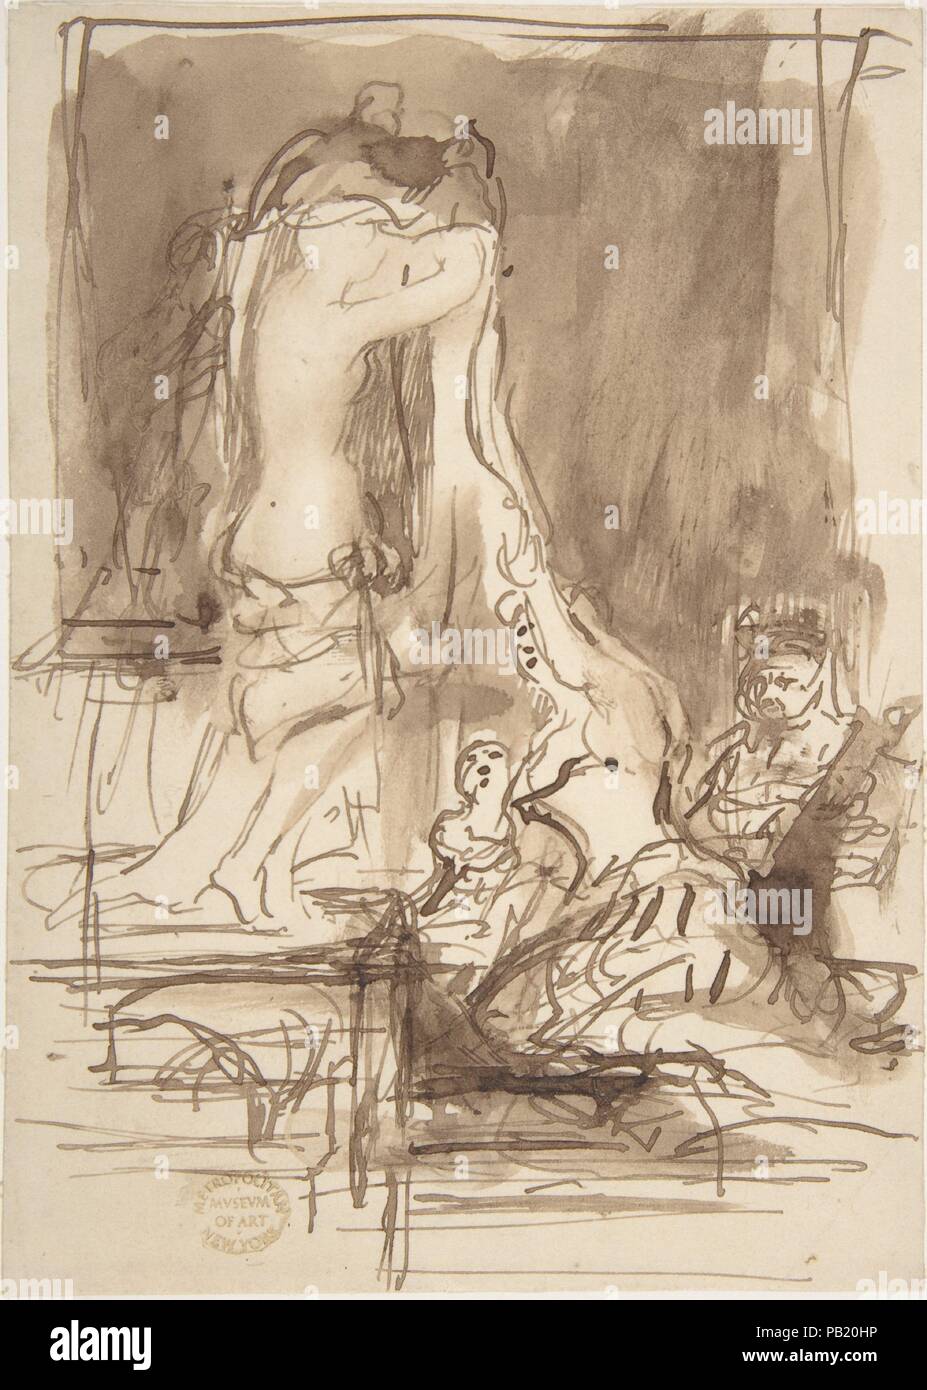 Study for 'The Bride at Her Toilet on the Day of Her Wedding'. Artist: Sir David Wilkie (British, Cults, Scotland 1785-1841 off Gibraltar). Dimensions: Sheet: 6 1/16 x 4 3/8 in. (15.4 x 11.1 cm). Date: ca. 1838.  This is one of a group of sketches where Wilkie developed compositional ideas for a painting he would show at the Royal Acdemy, London in 1838 (now National Academy of Scotland, Edinburgh). Pen lines suggest movement, and wash is used to indicate shadow as the artist conveys the movements of a young woman dressing for her wedding assisted by a companion and watched by an older woman.  Stock Photo